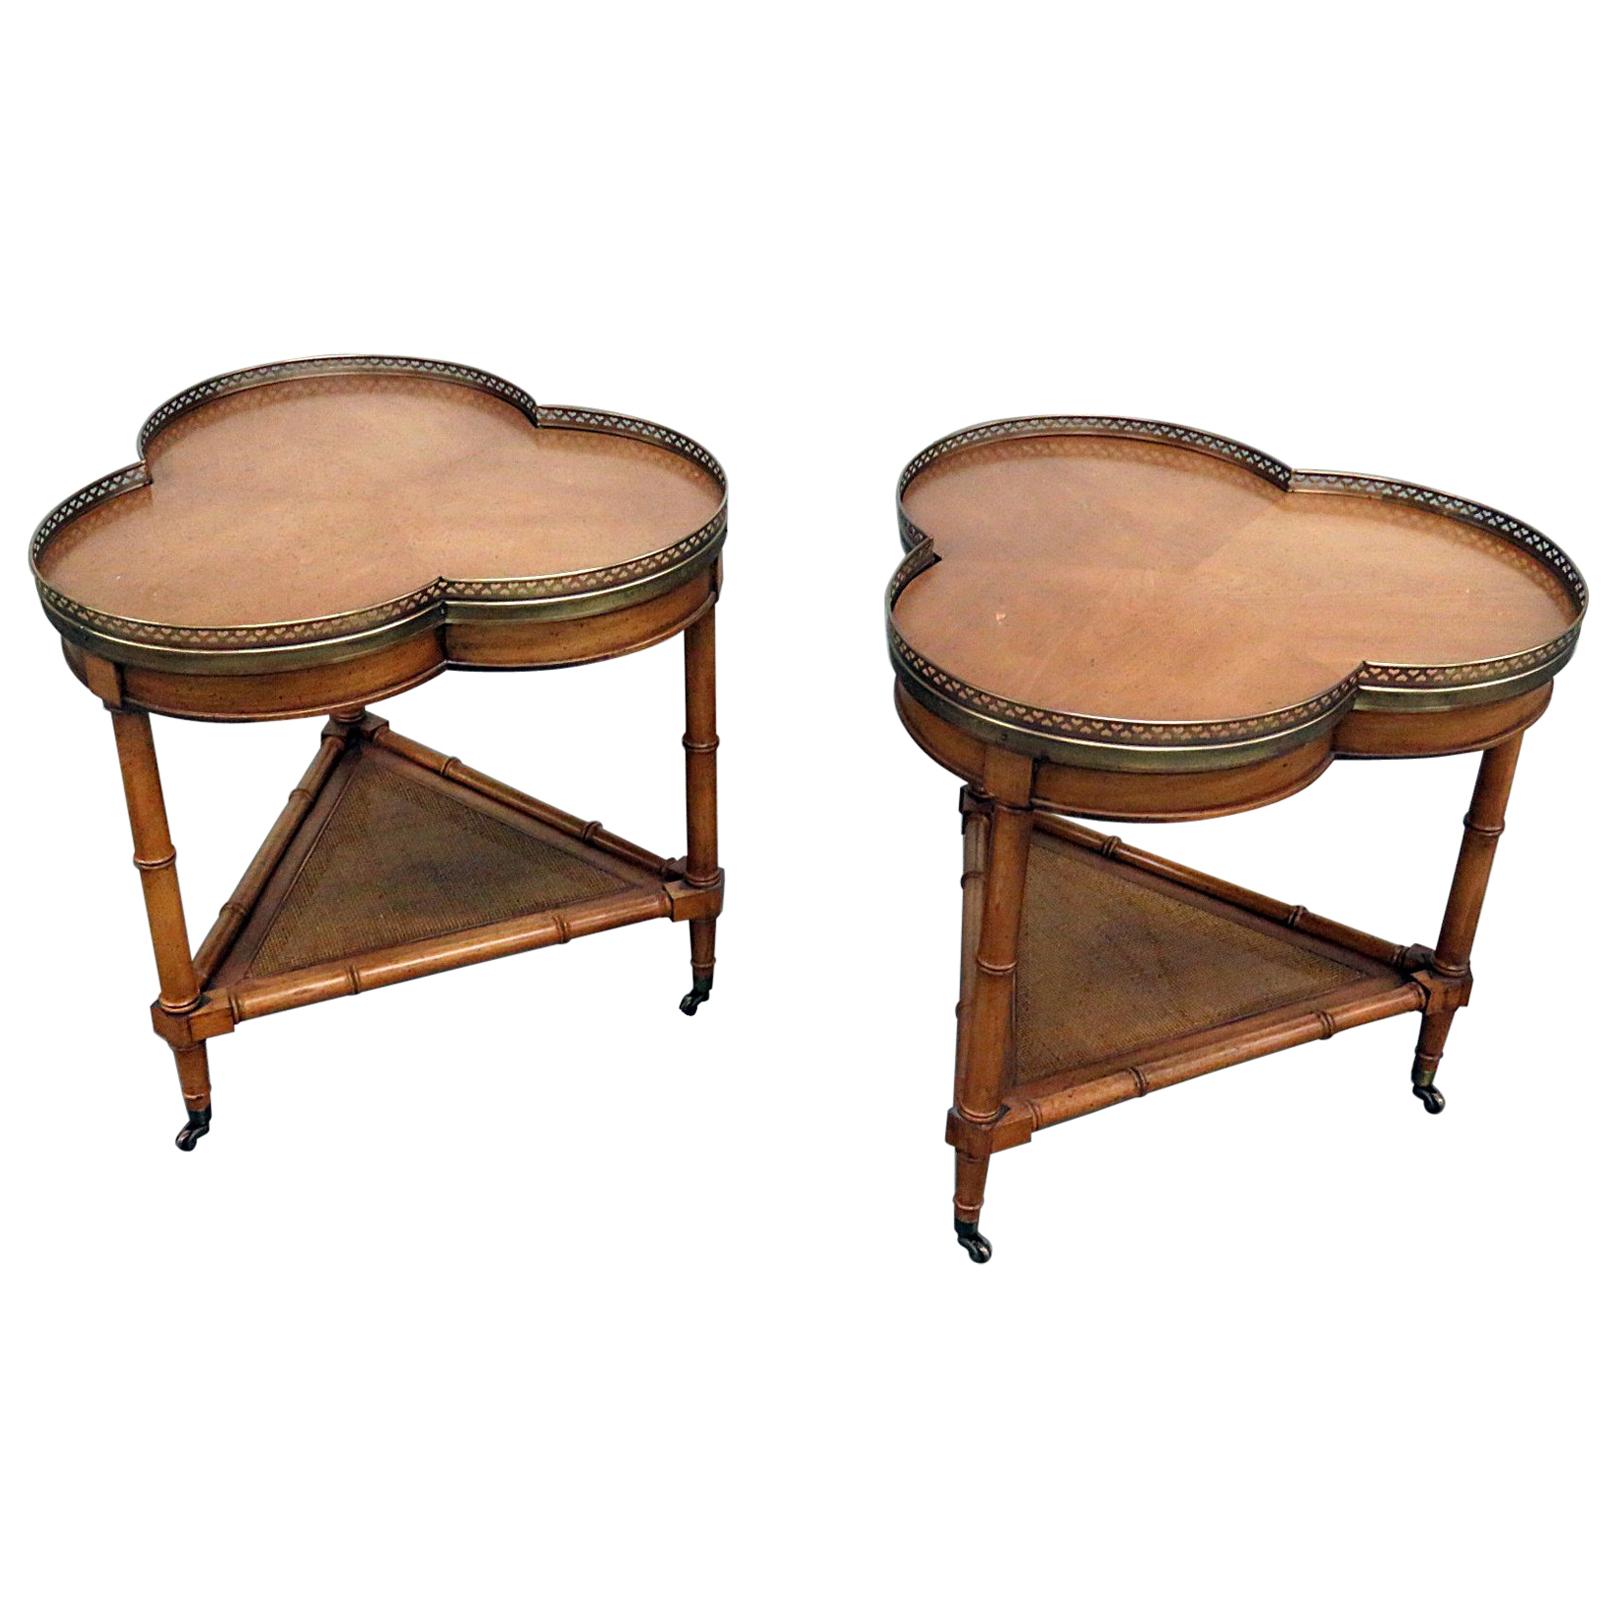 Pair of French Louis XVI Style Walnut Faux Bamboo Side Tables With Brass Gallery